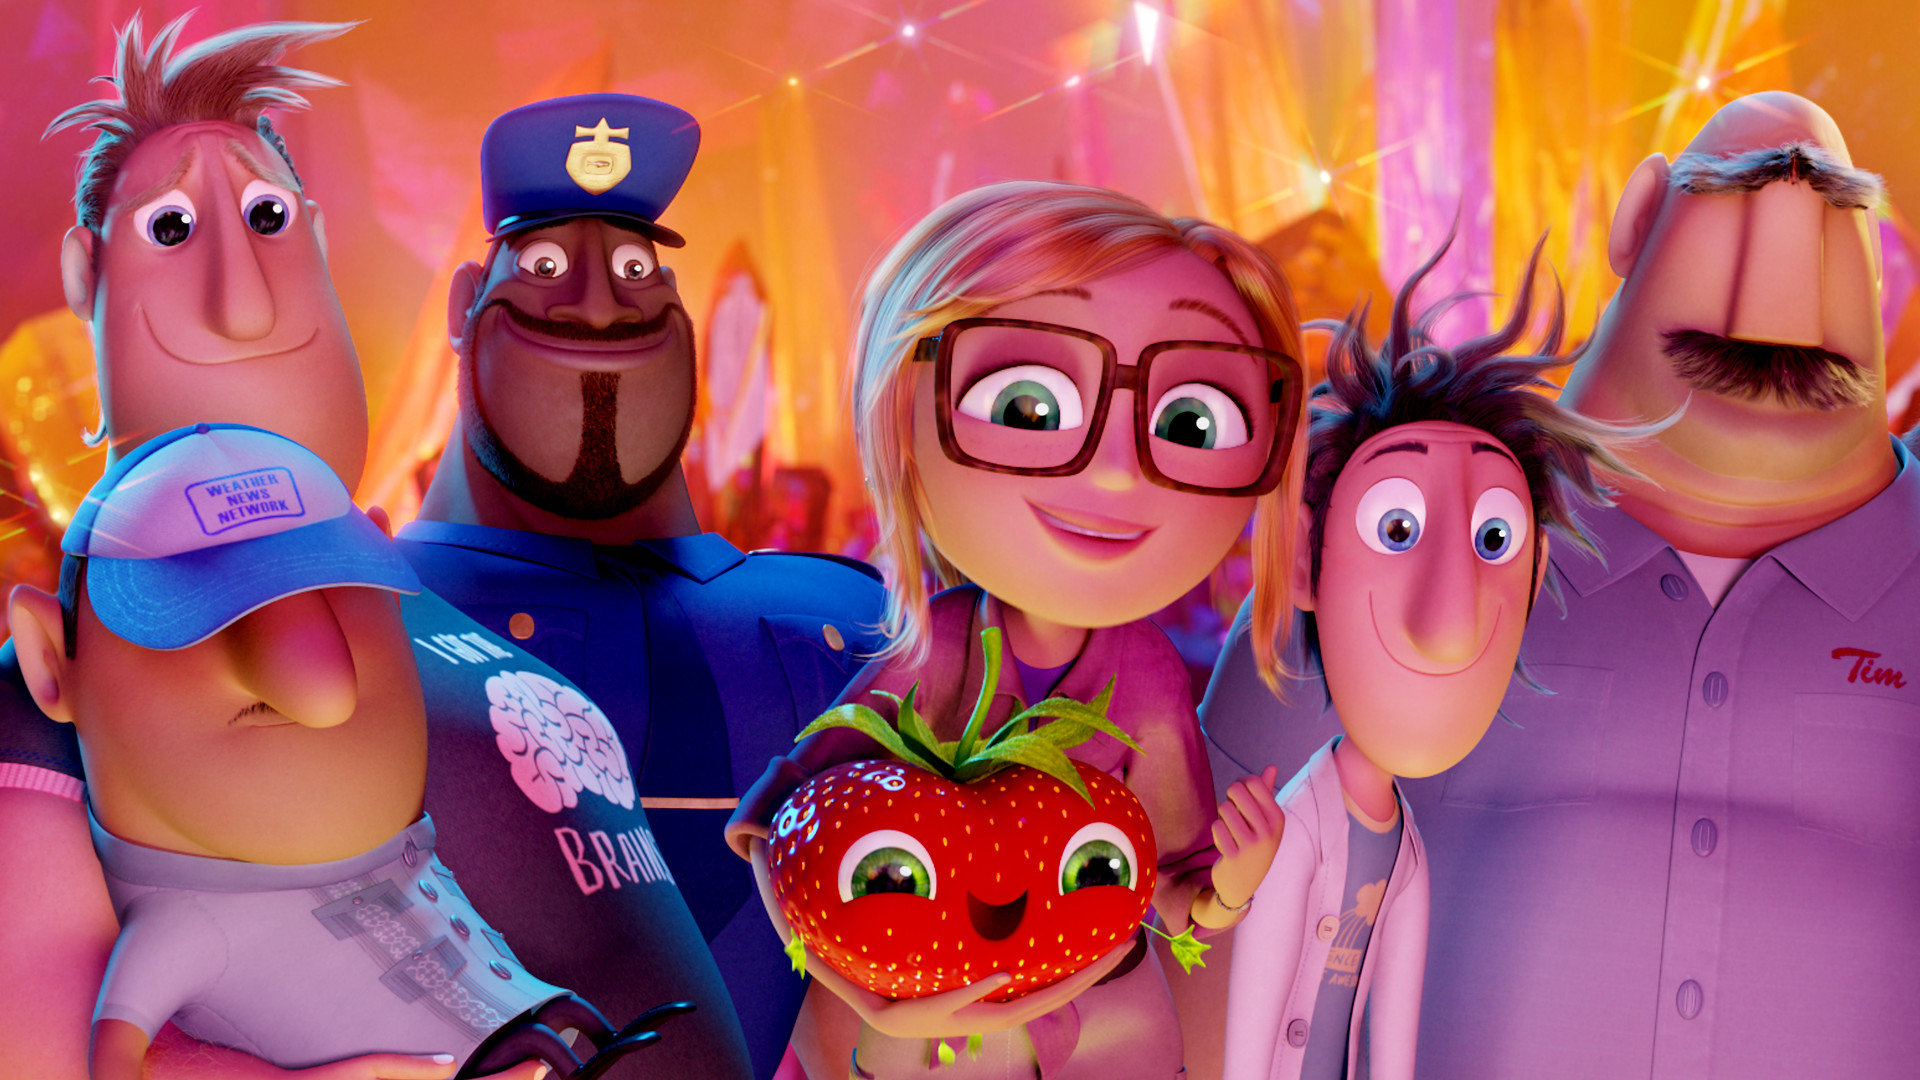 Awesome Cloudy With A Chance Of Meatballs 2 free wallpaper ID:164011 for hd 1920x1080 PC